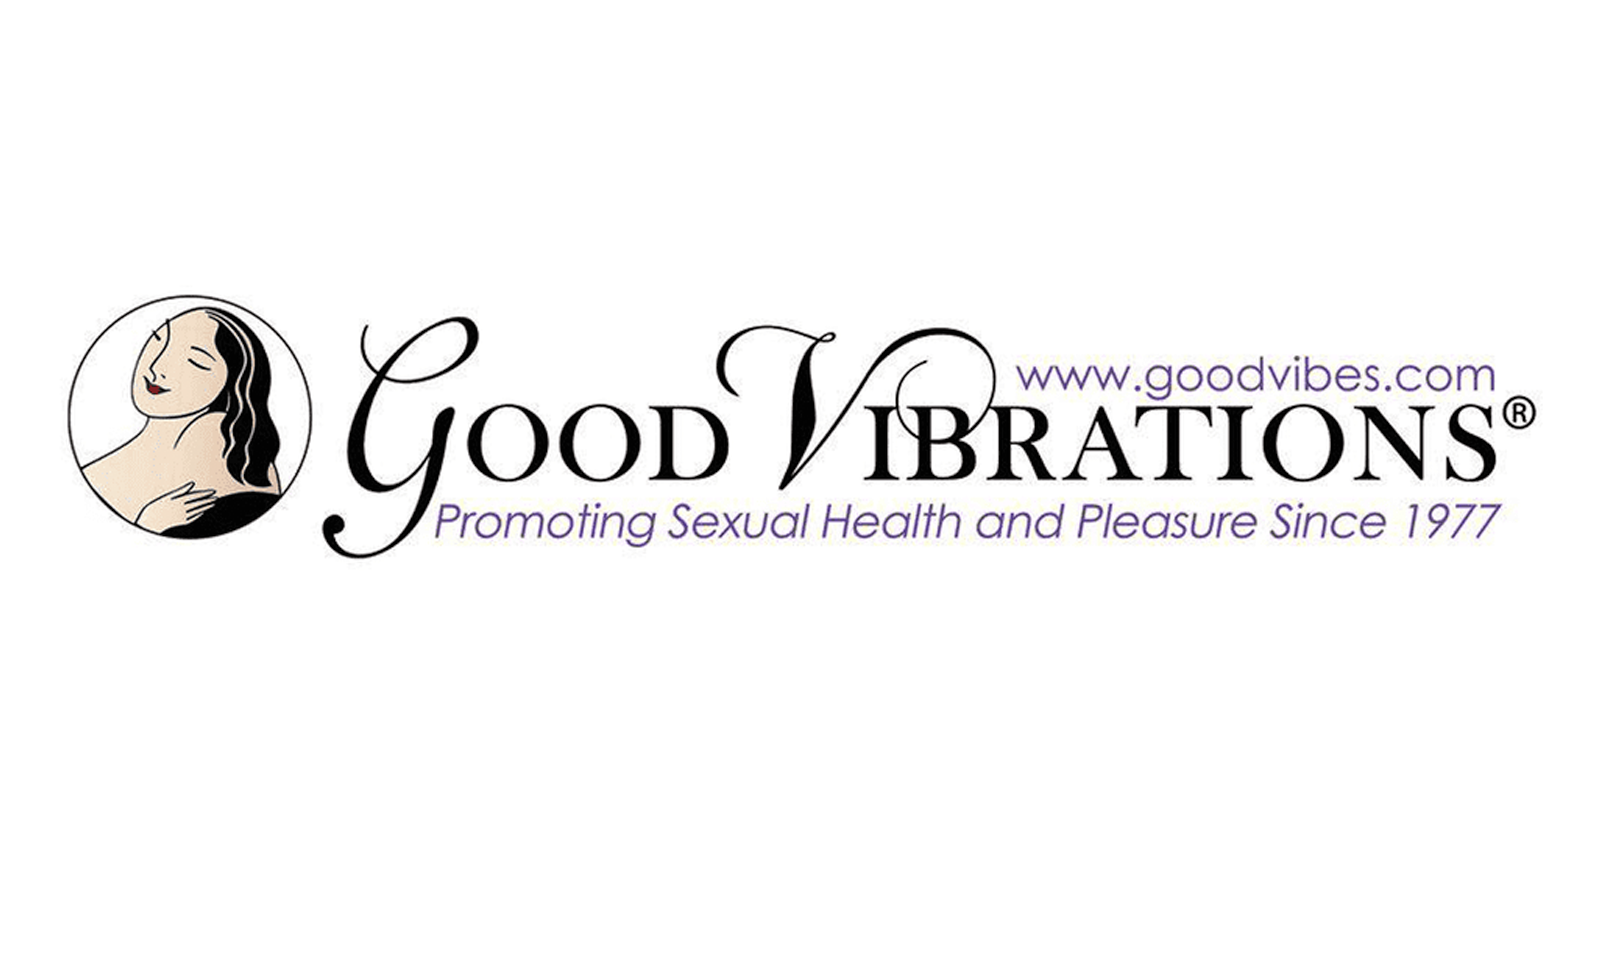 Good Vibrations Partners With Local Food Banks